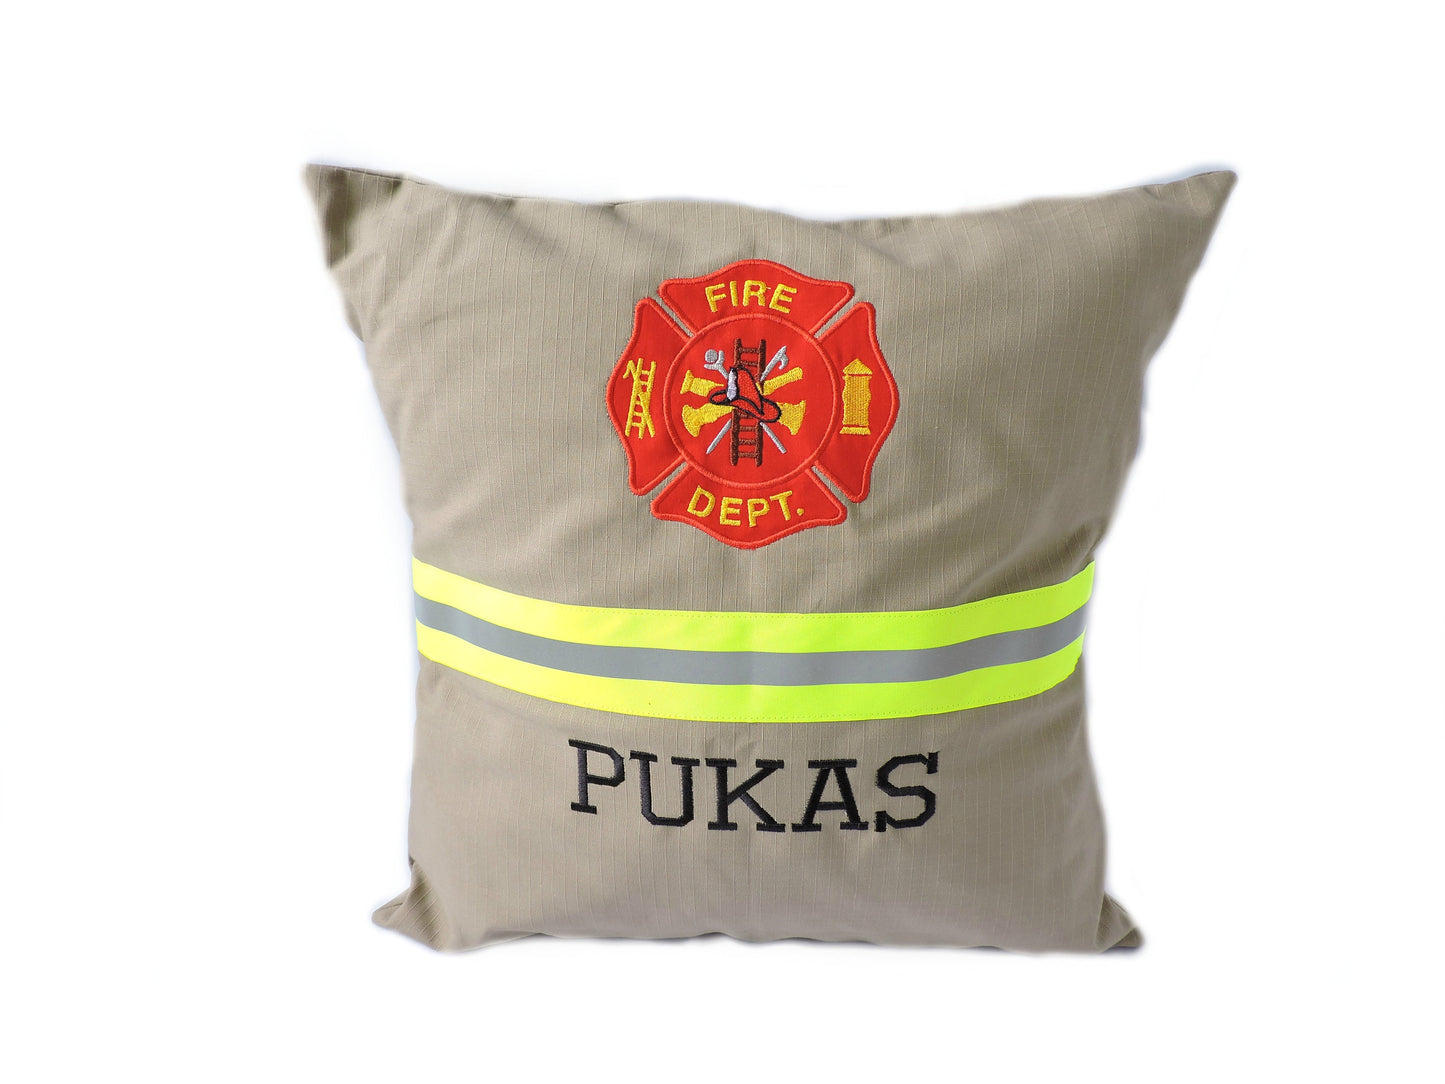 tan fabric Firefighter pillow cover with maltese cross